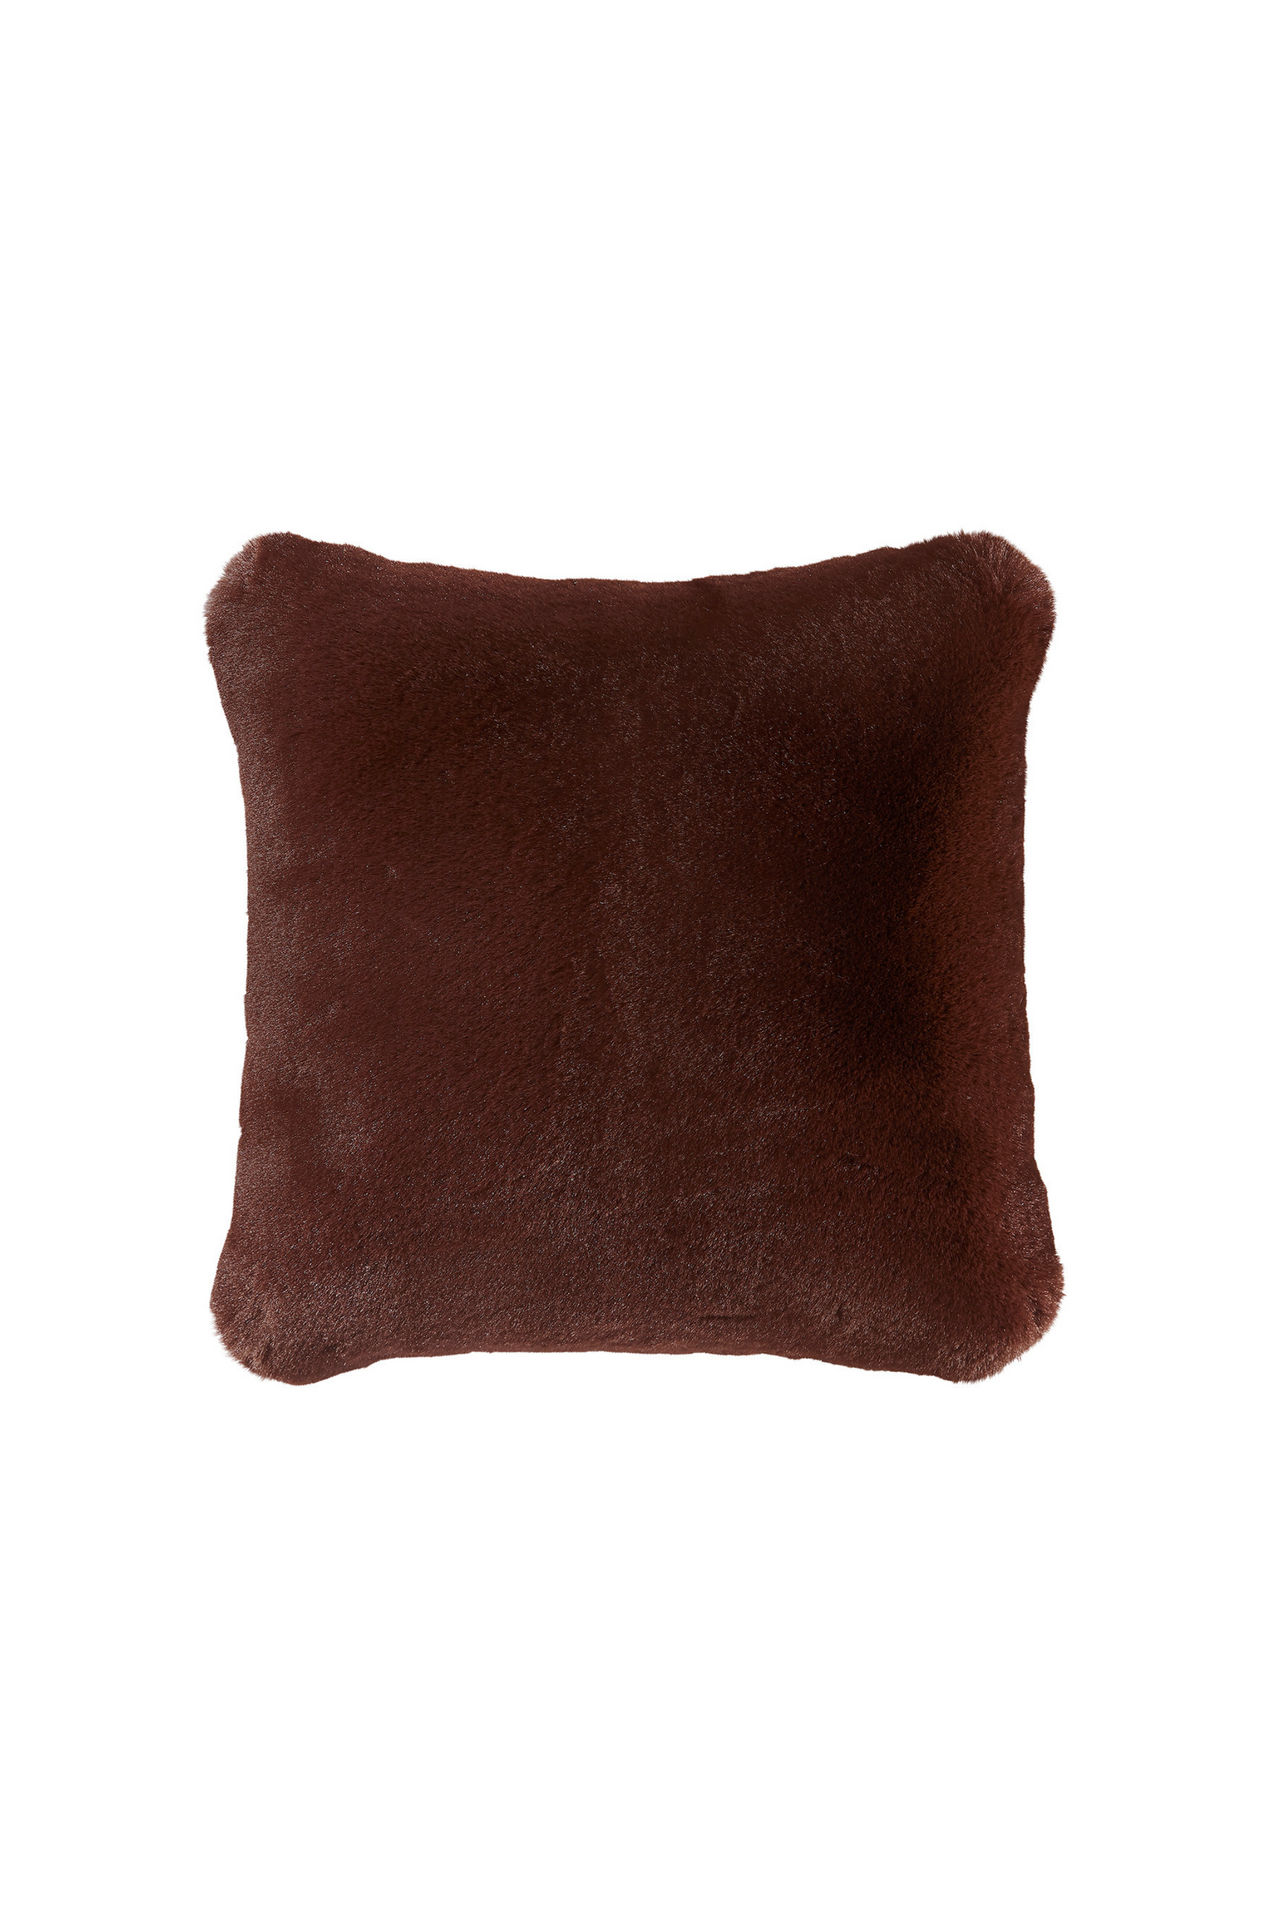 Faux fur throw pillow in chocolate brown.